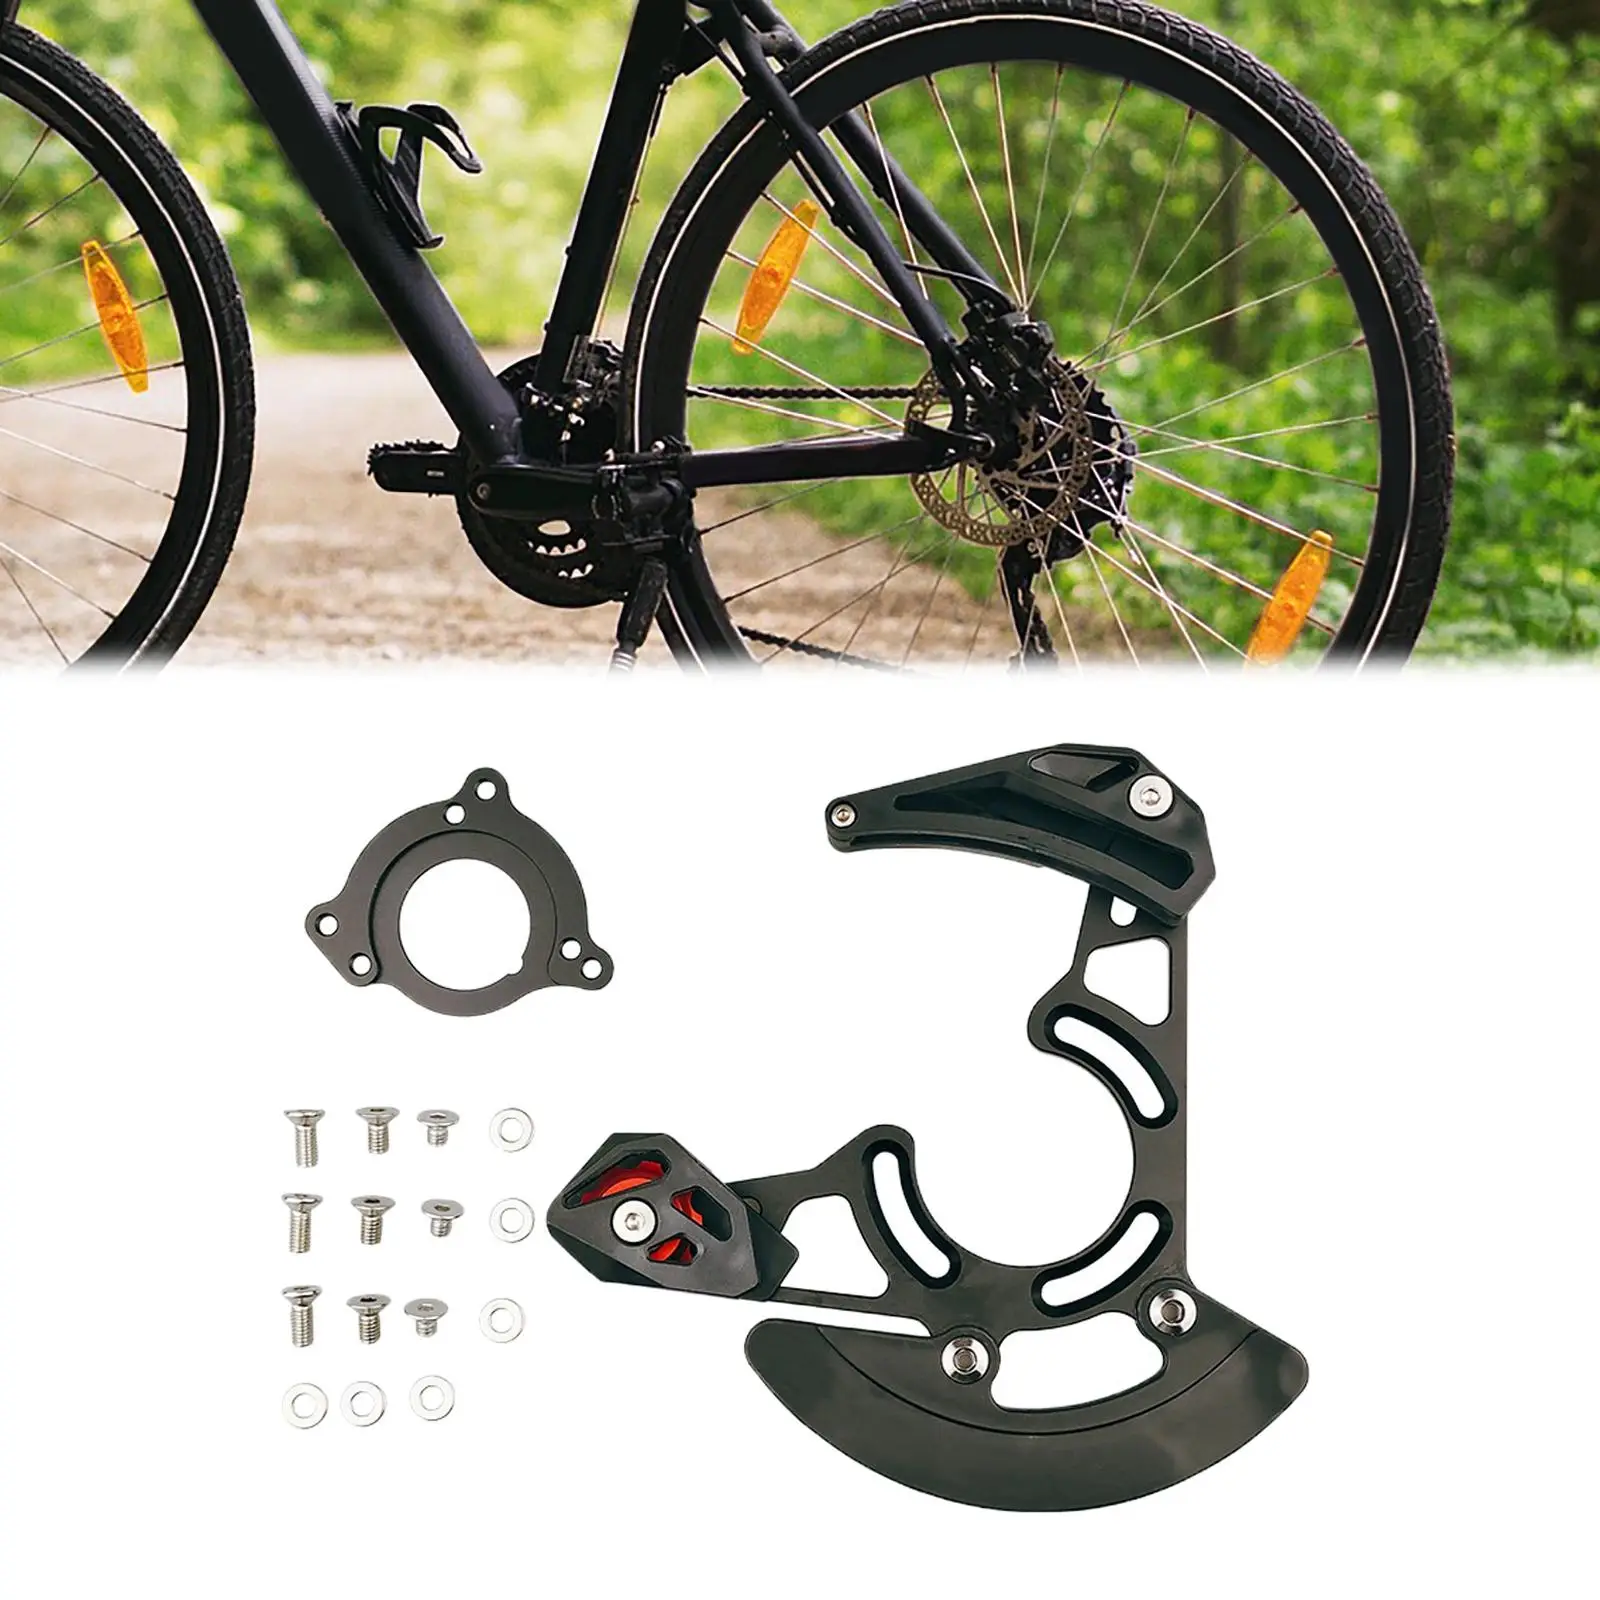 Chain Guide, 32T-38T Protector Single Disc Soft Tail Chain Guard Aluminum Alloy for Bicycle